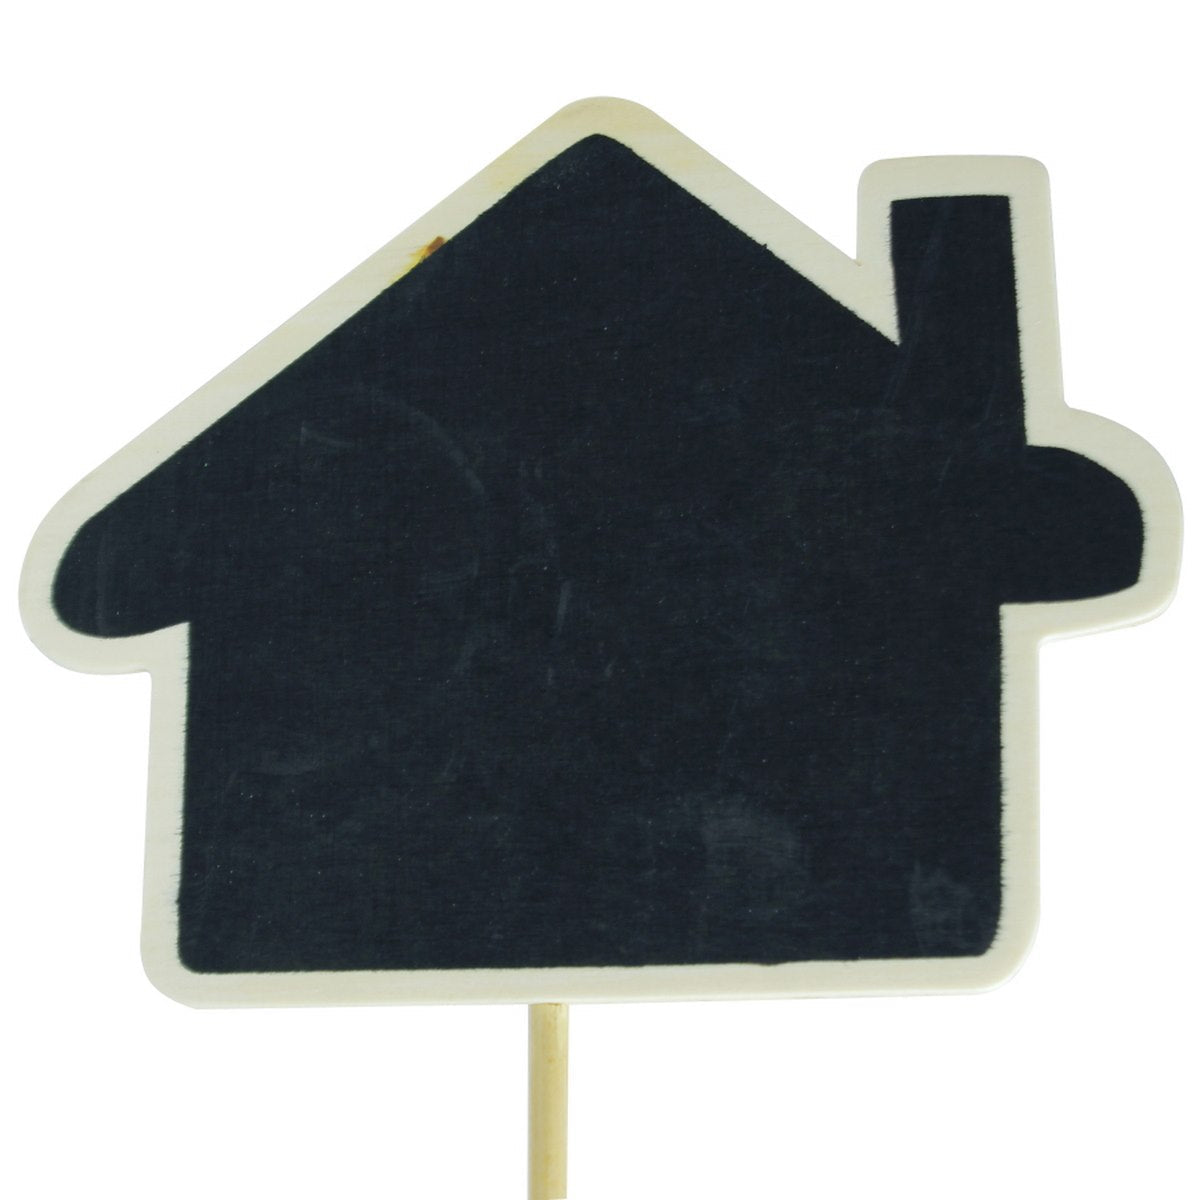 jags-mumbai All Kinds Boards (white,notice,black,slate) Wooden Black Board With Stand Big WBBW01